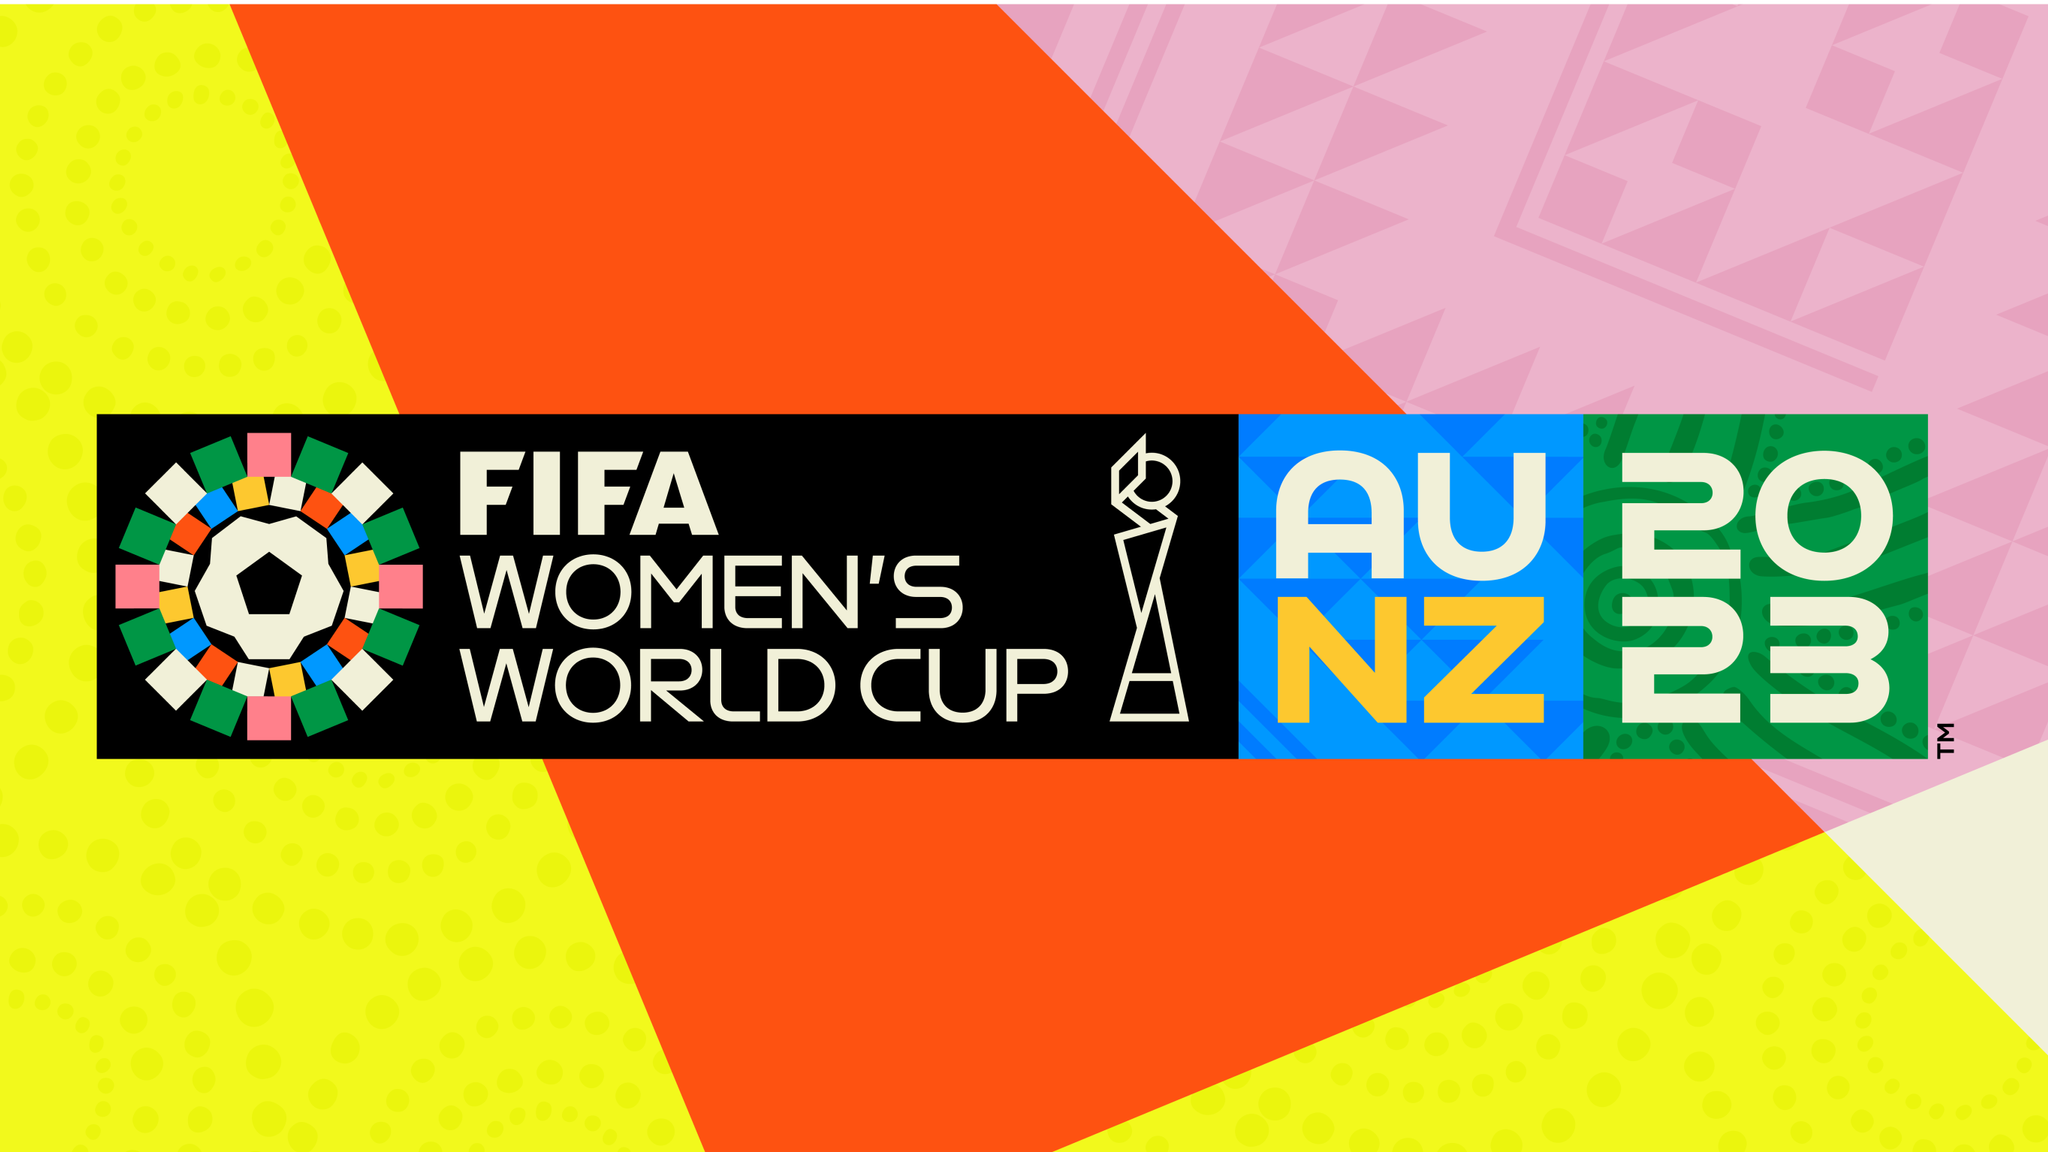 How to watch the FIFA Women’s World Cup 2023 live and online for free